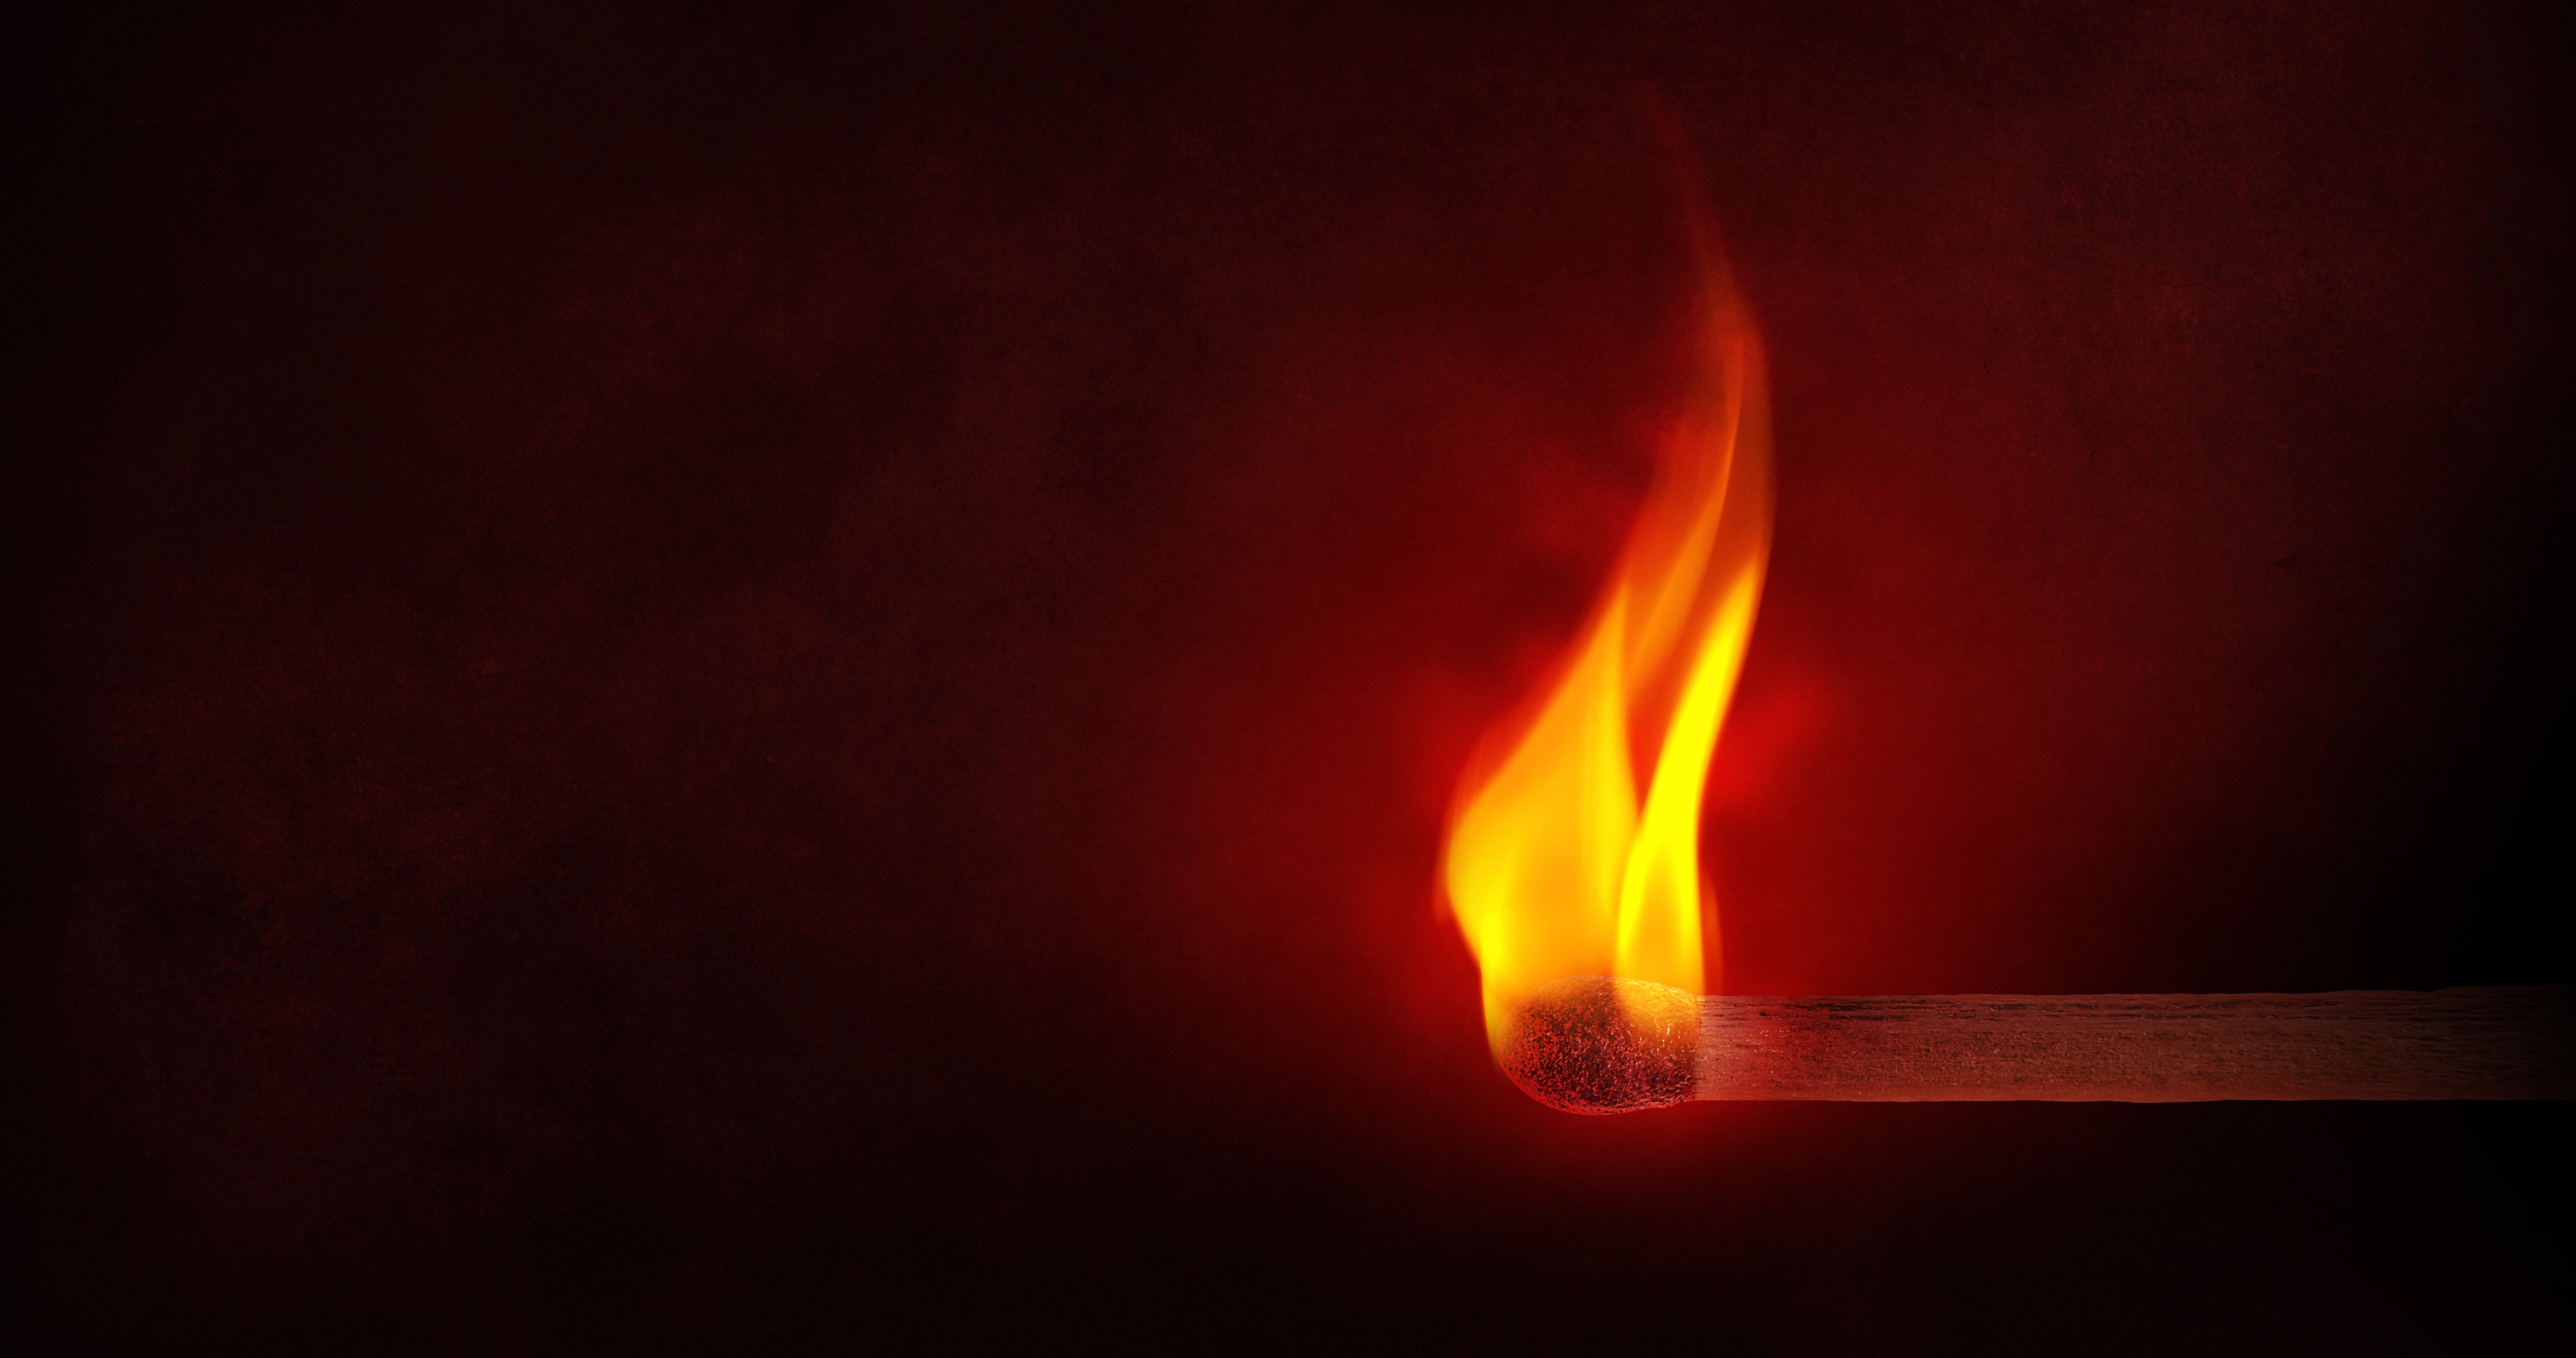 Download wallpaper 4096x2160 match, fire, flame, sulfur HD background